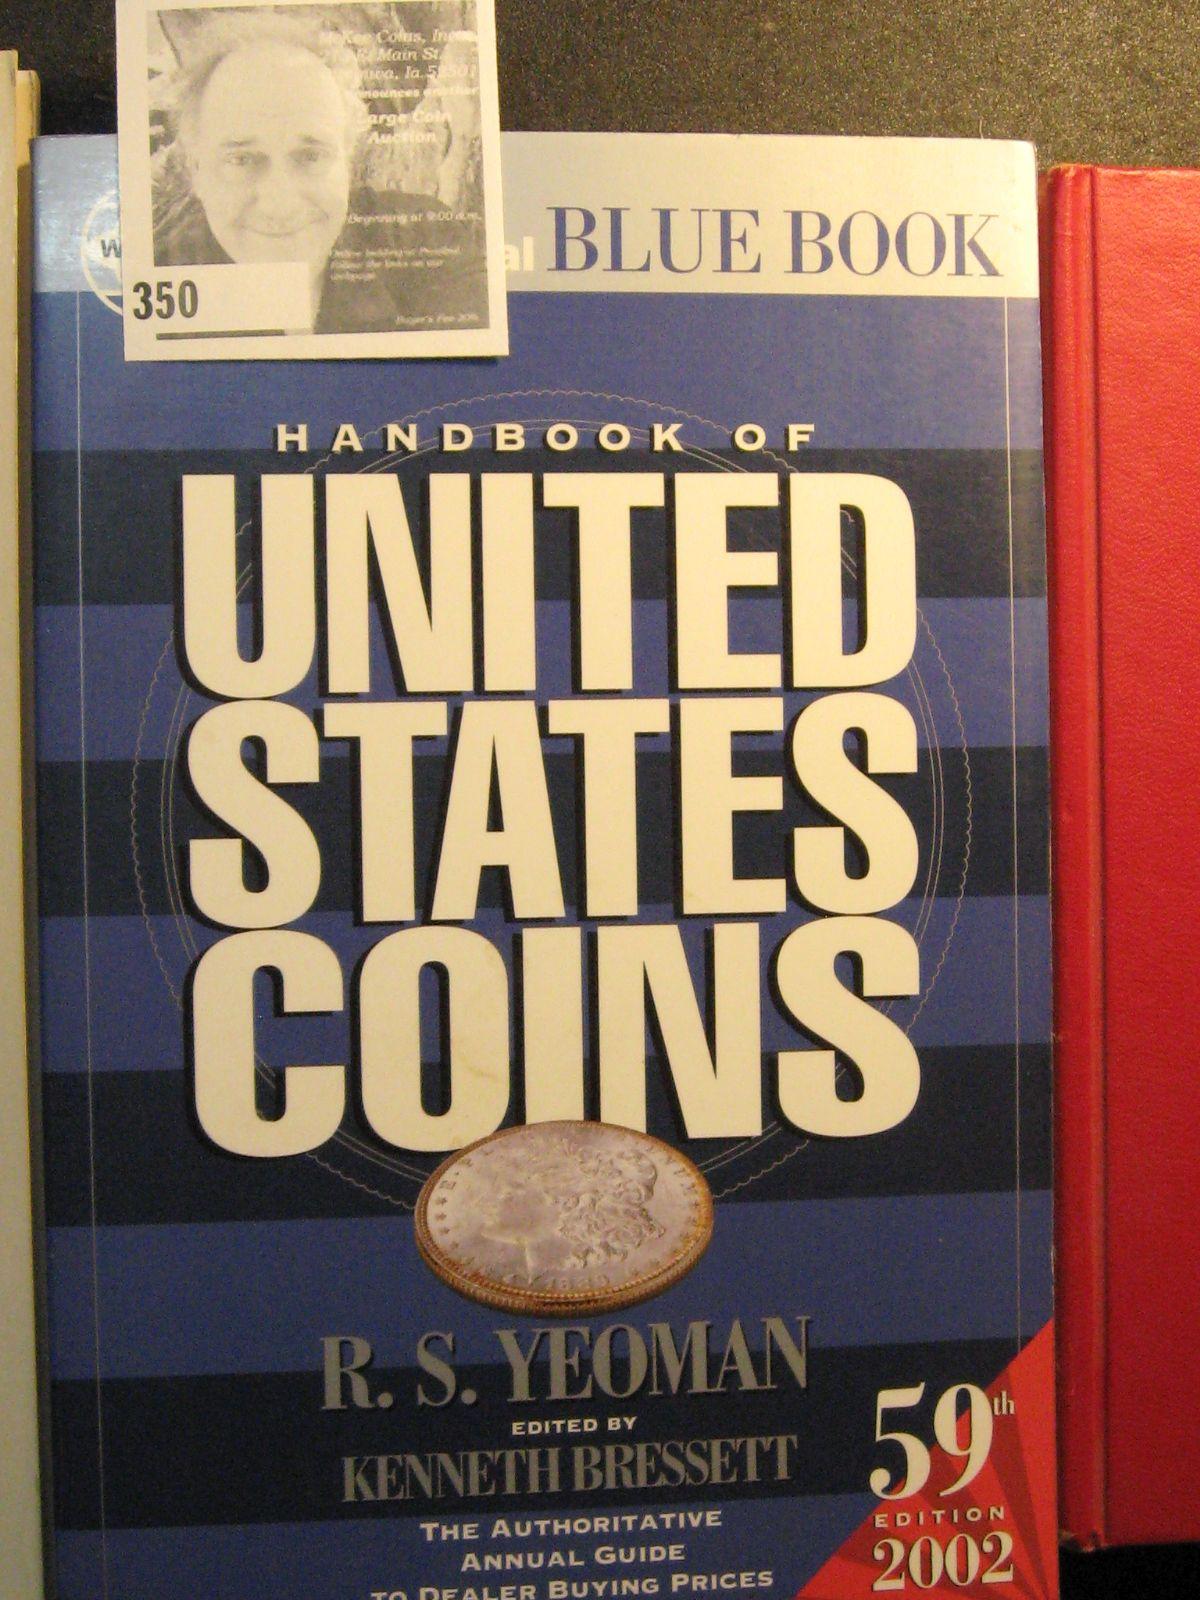 Counterfeit Detection Book, 2002 â€œUnited States Coins' Blue Book & 1963 16thEdition of the â€œRed